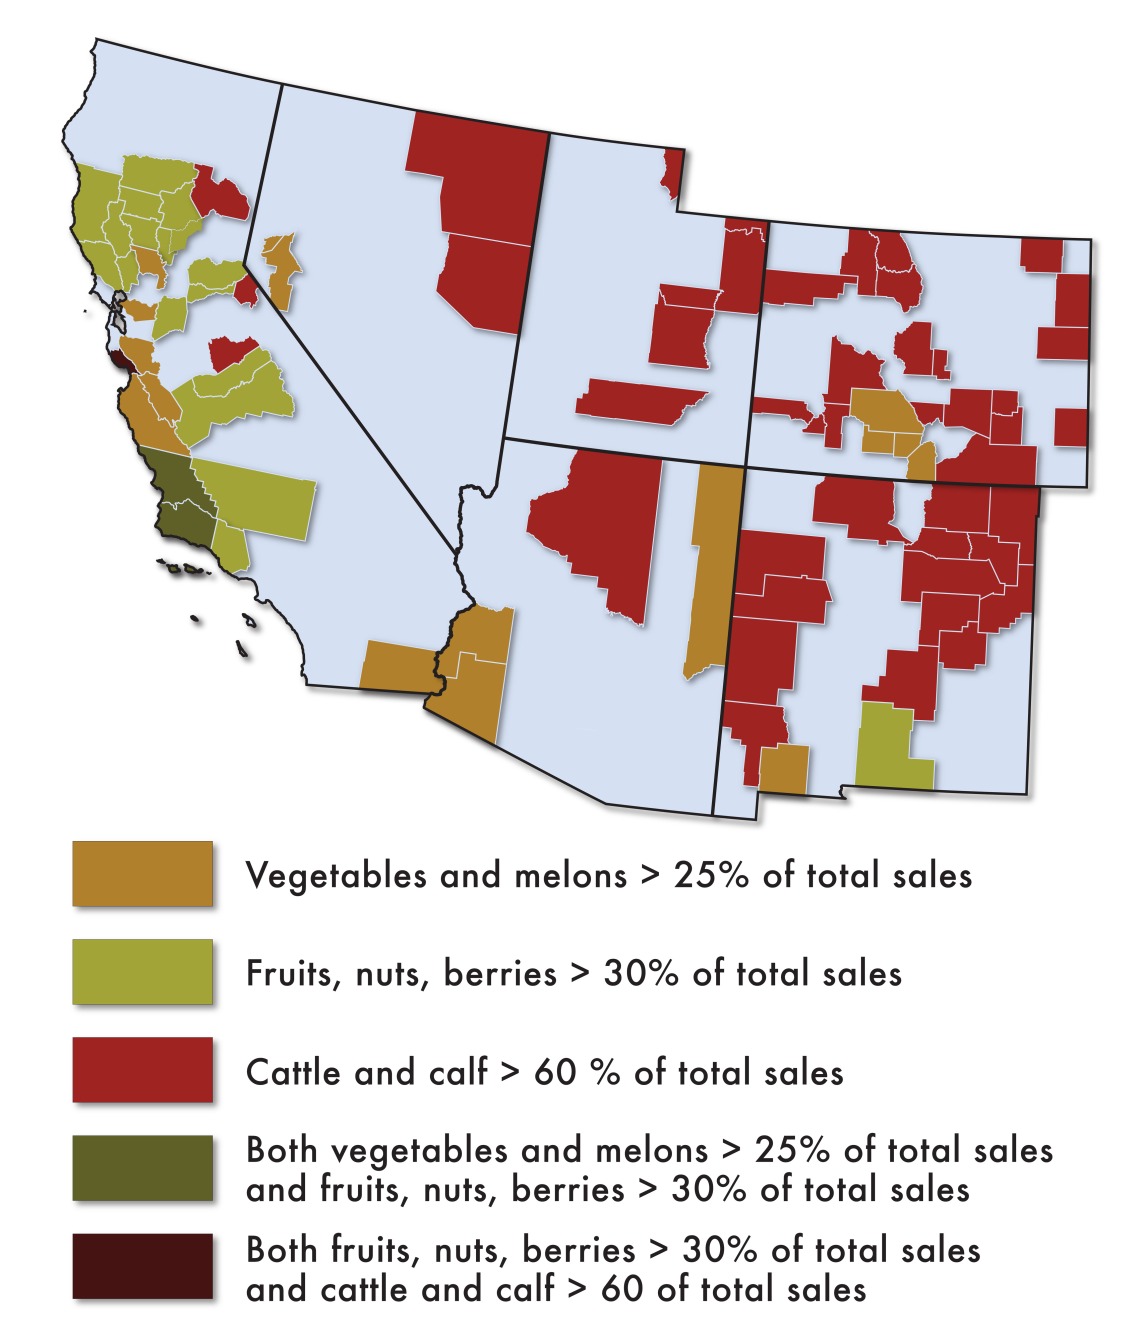 The region produces much of the nation’s high-value specialty crops (fruits, vegetables, nuts) that are vulnerable to climate change.